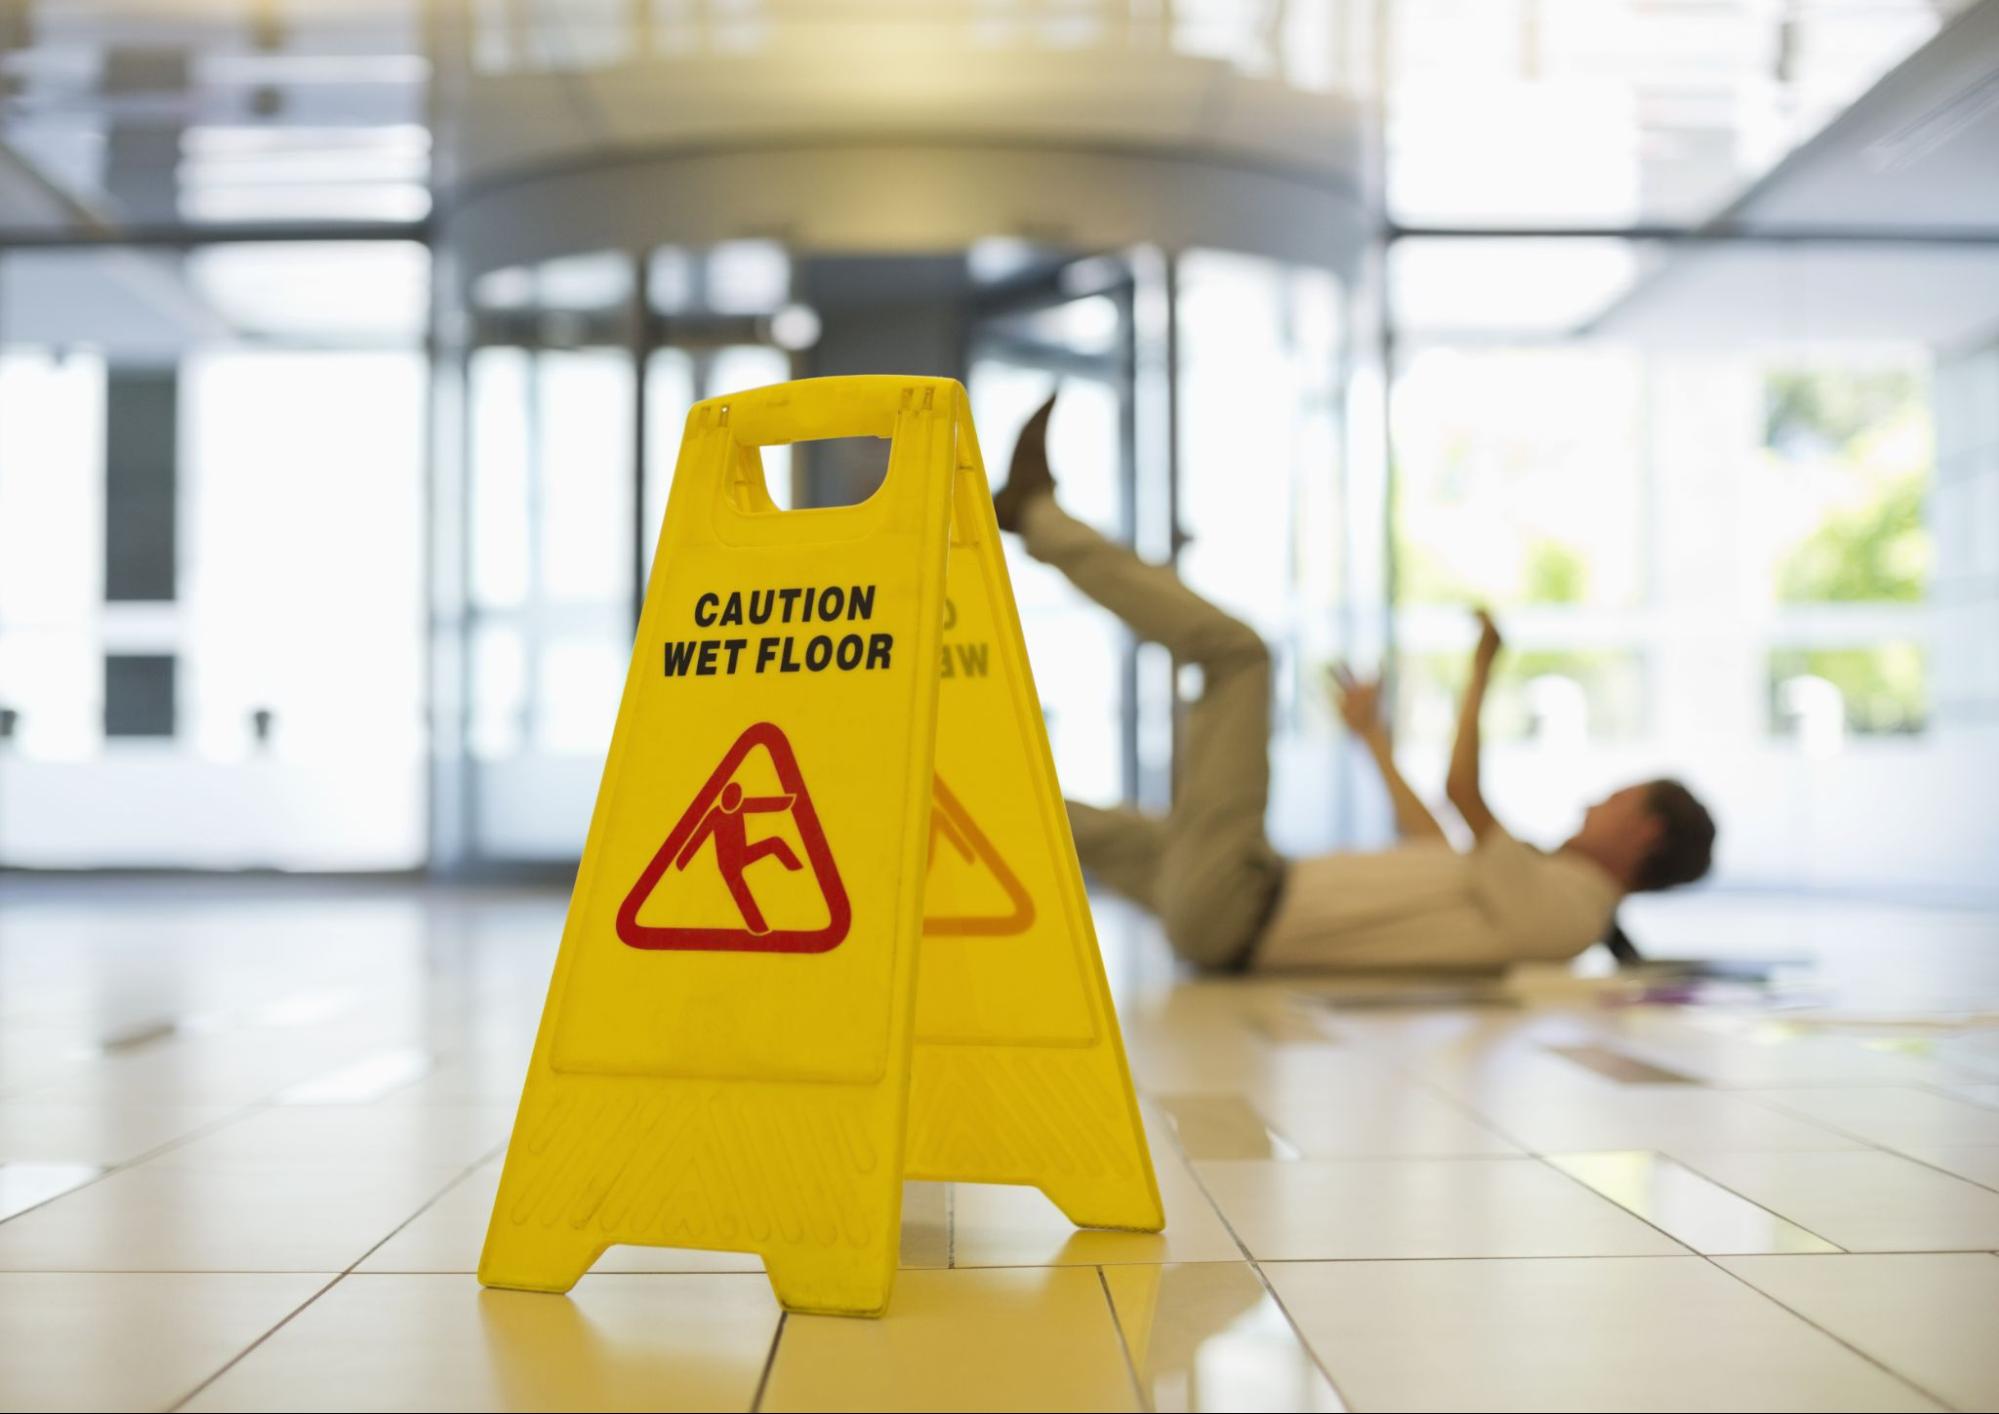 Yellow caution sign and a man slipping on wet floor in the background